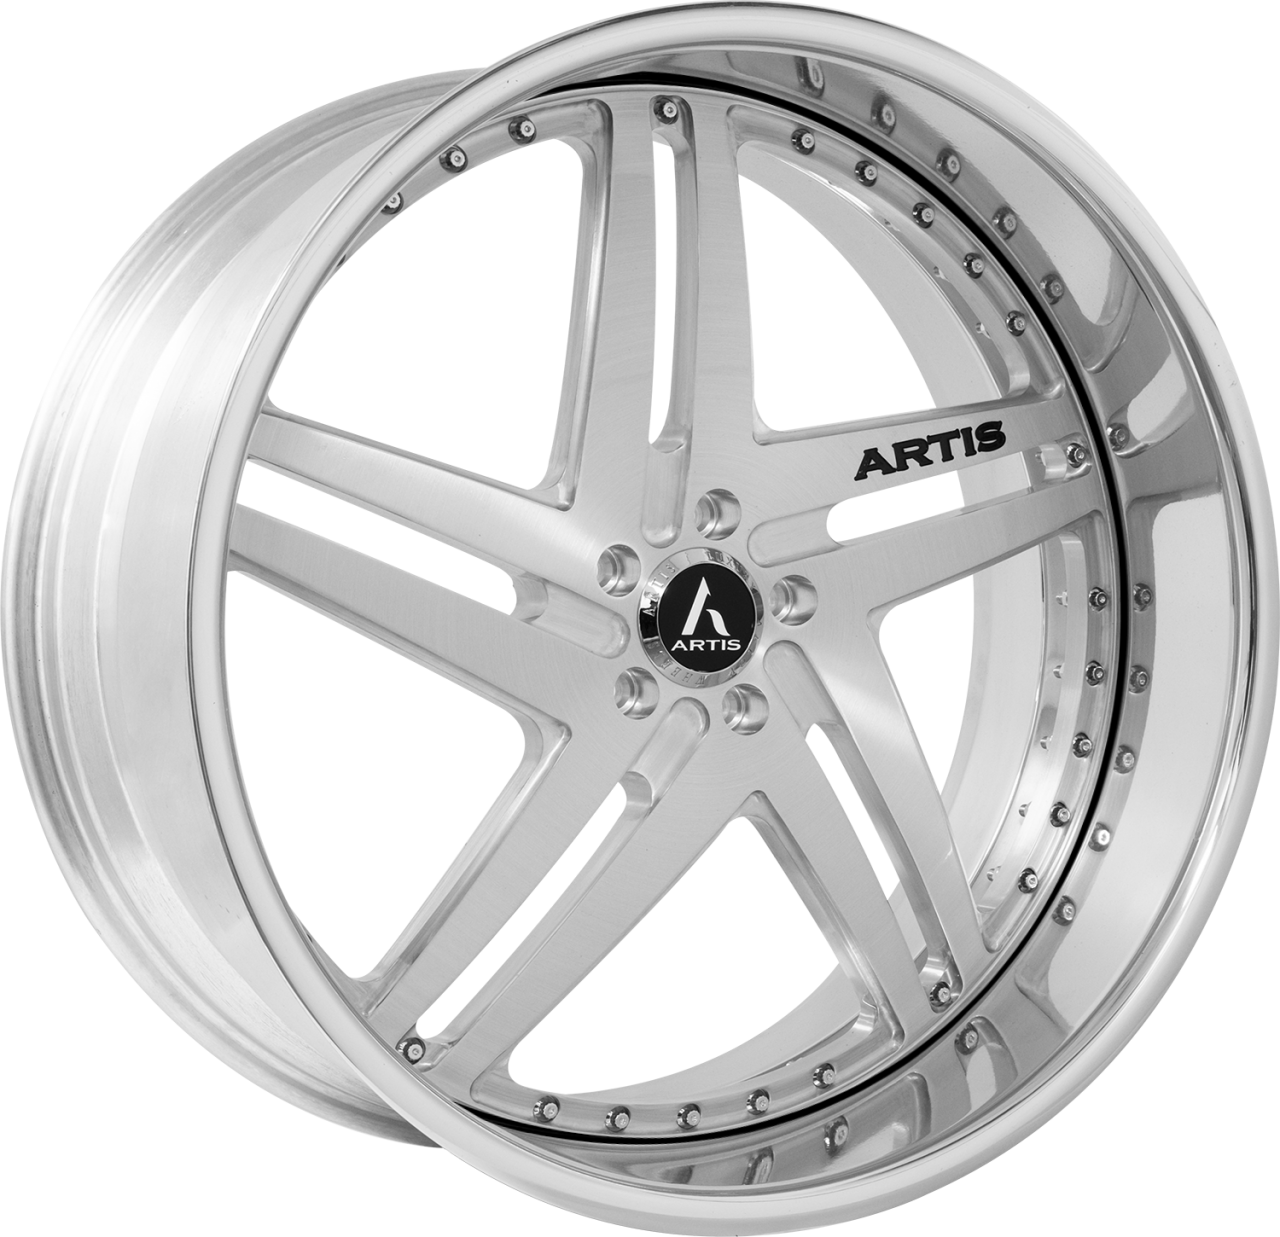 Artis Forged Lucid wheel with Brushed finish